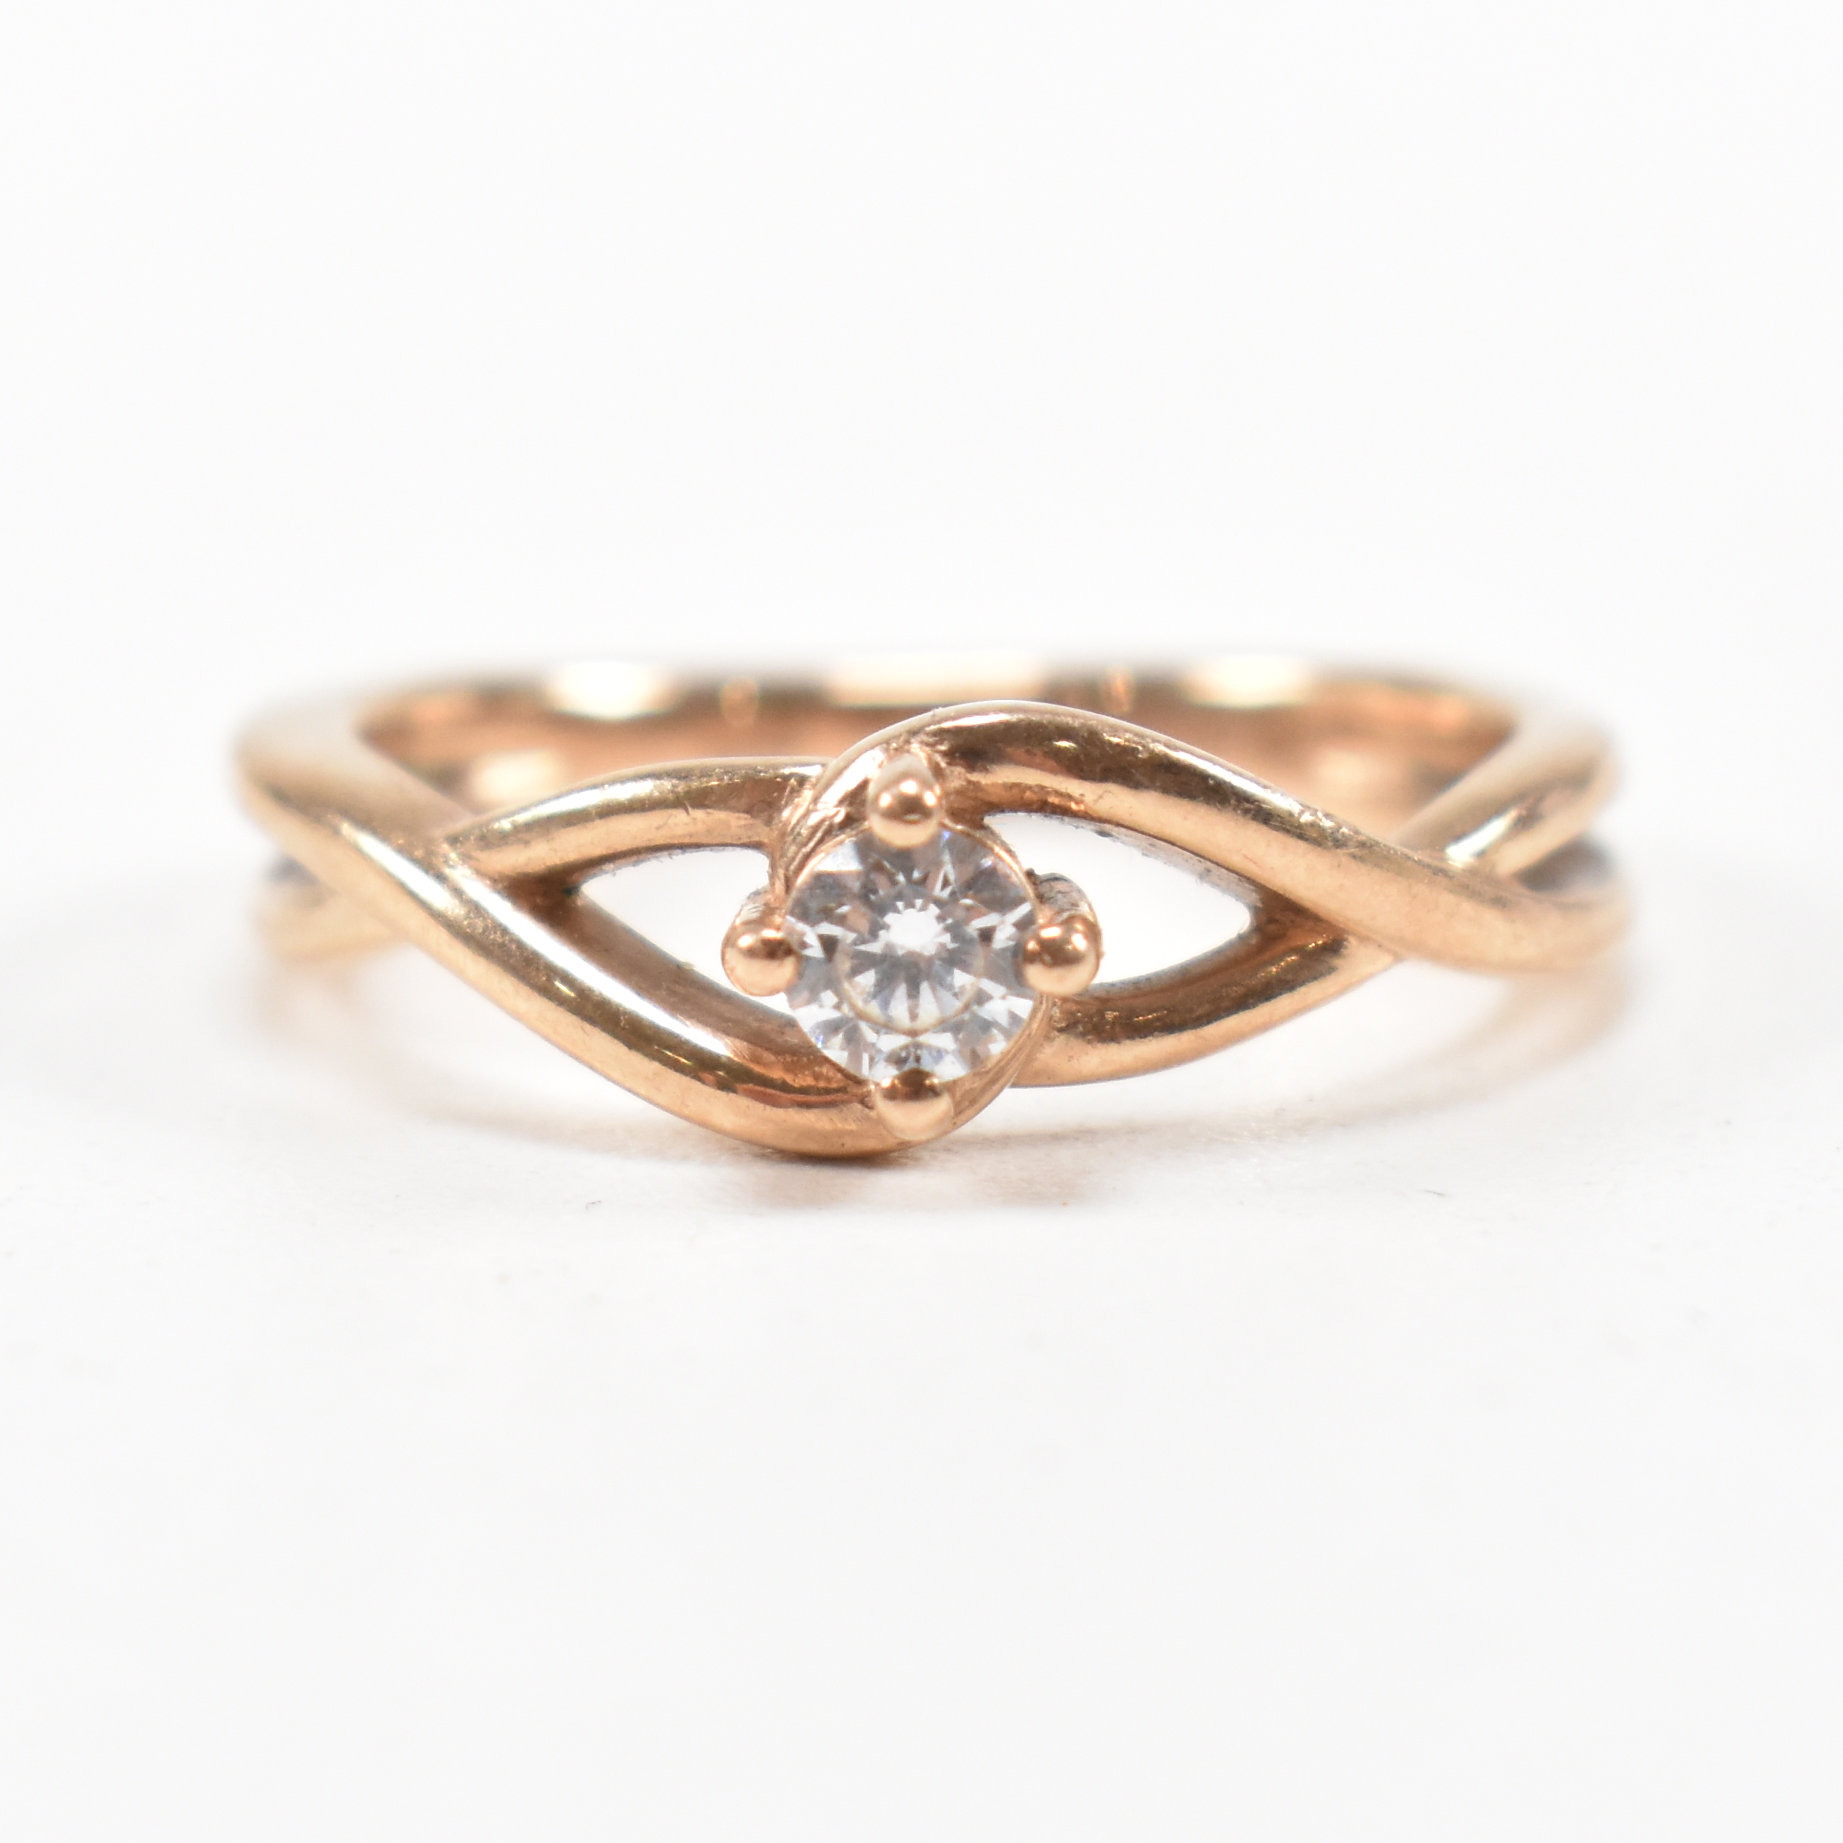 HALLMARKED 9CT ROSE GOLD & WHITE STONE SOLITAIRE CROSSOVER RING - Image 2 of 9